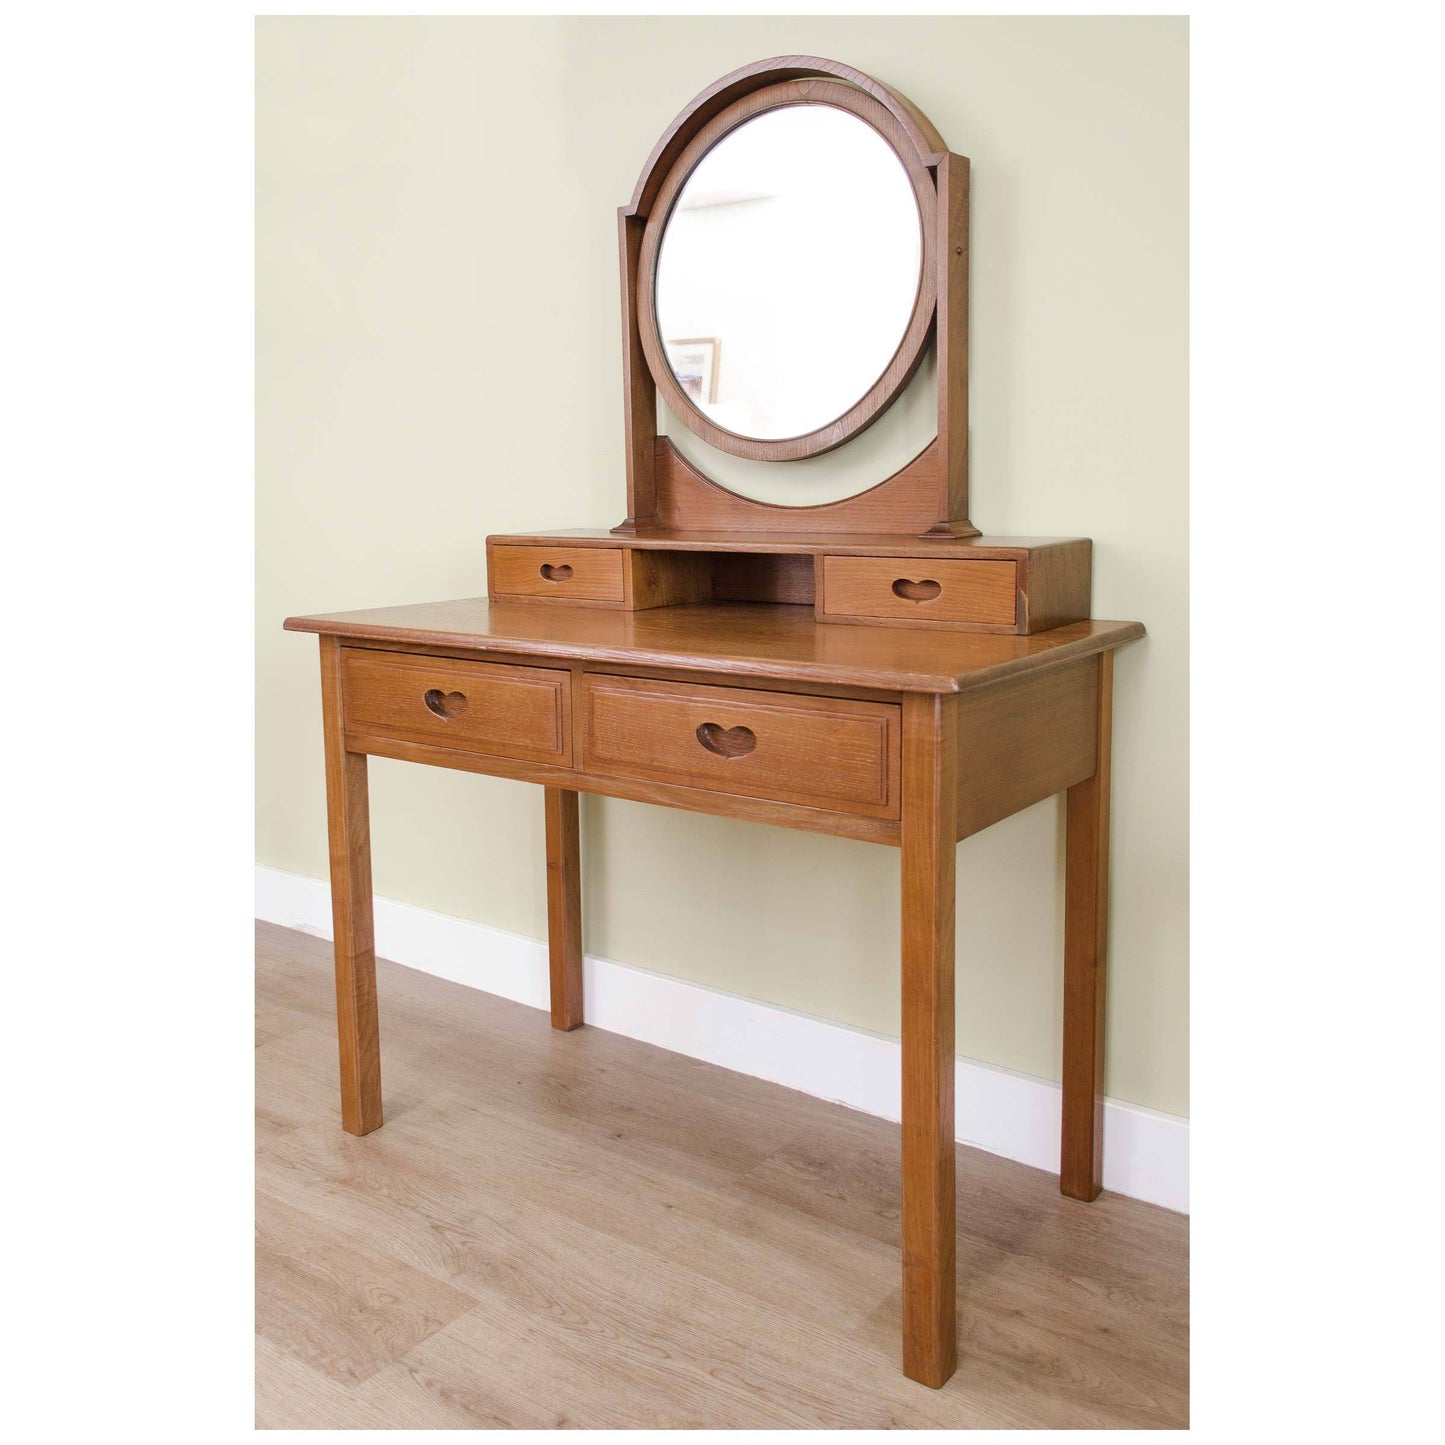 Heal and Co (Ambrose Heal) Ambrose Heal Rare Arts and Crafts Sweet Chestnut Dressing Table C. 1905 c. 1905